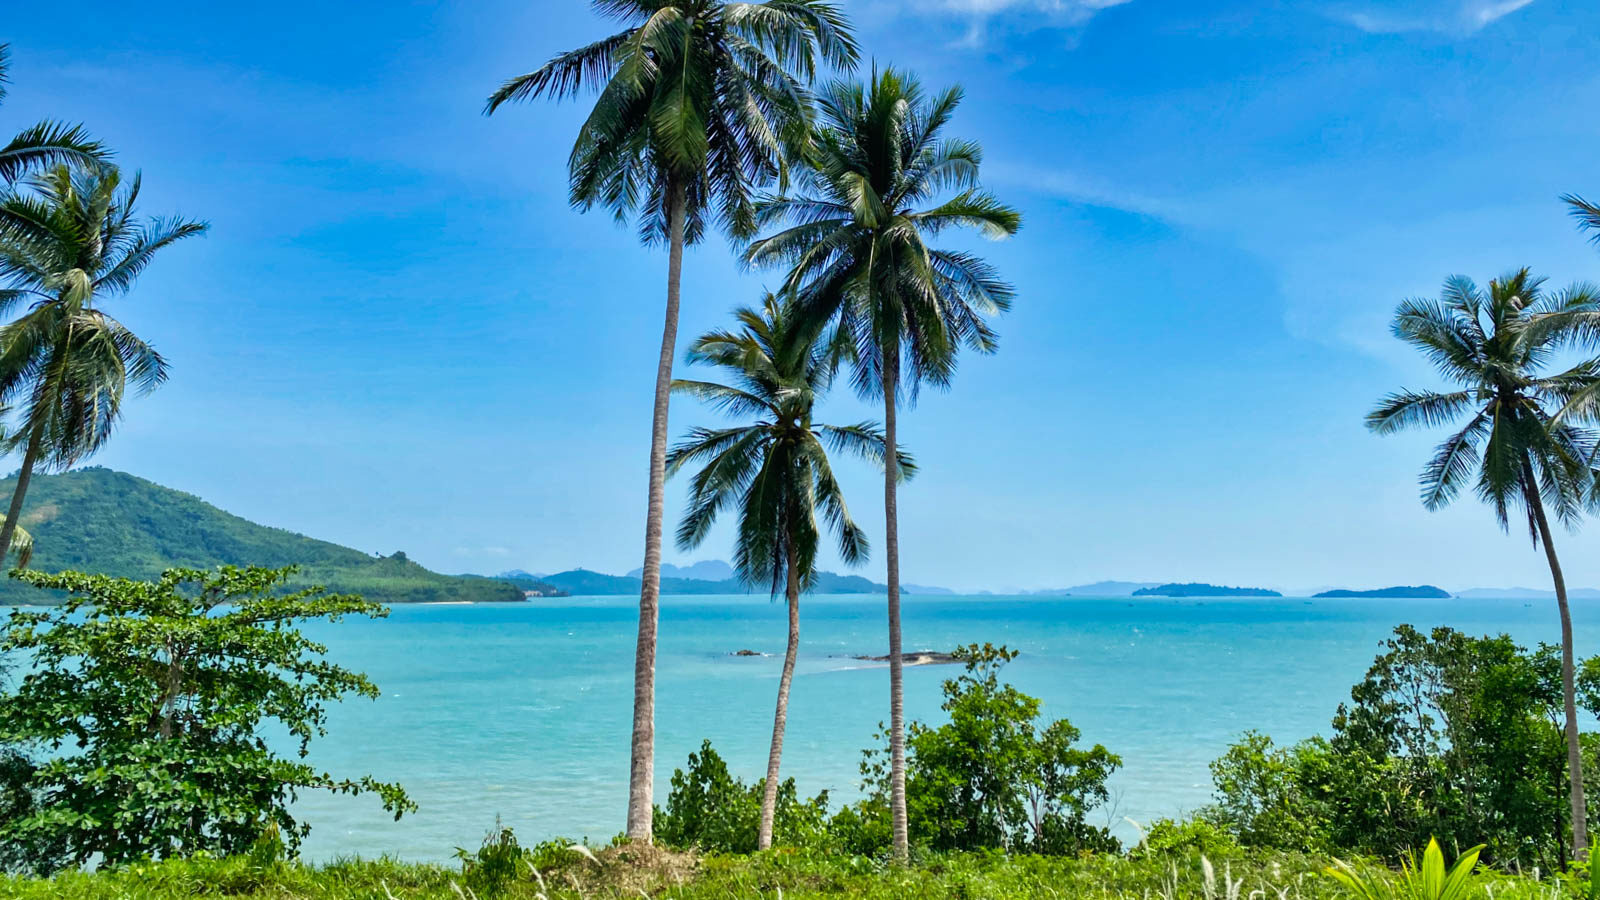 Beach landscape with palm trees in Phuket, Thailand